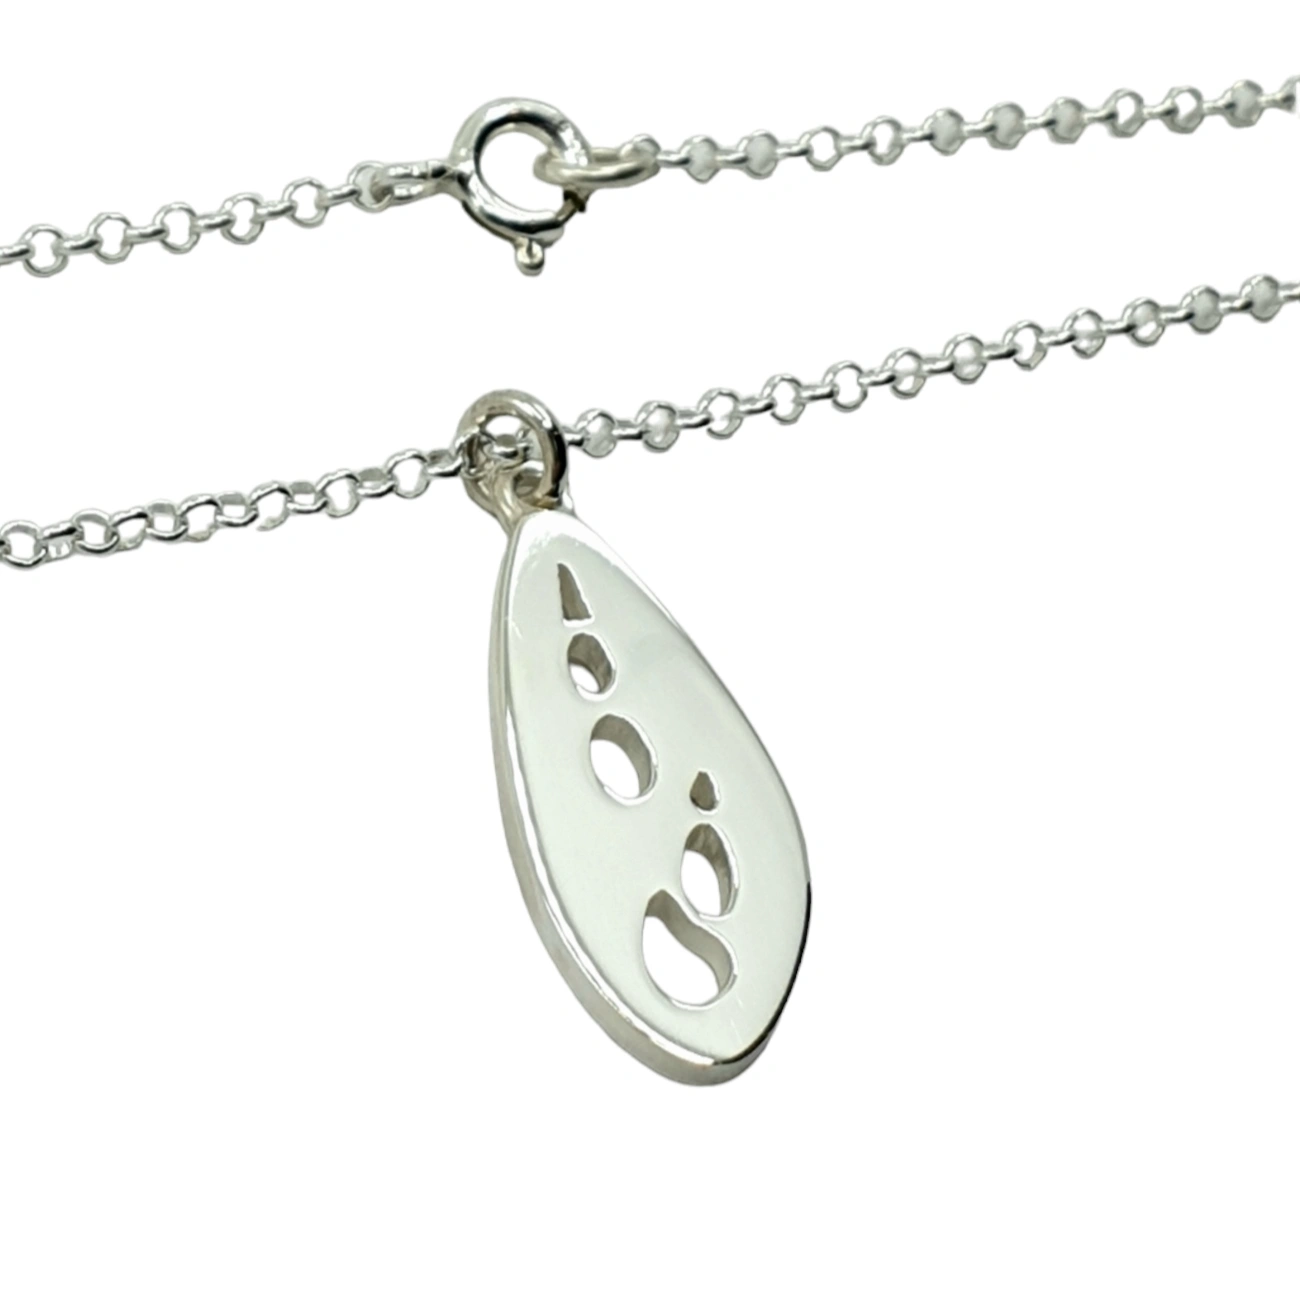 Animal print jewellery - Bettong necklace